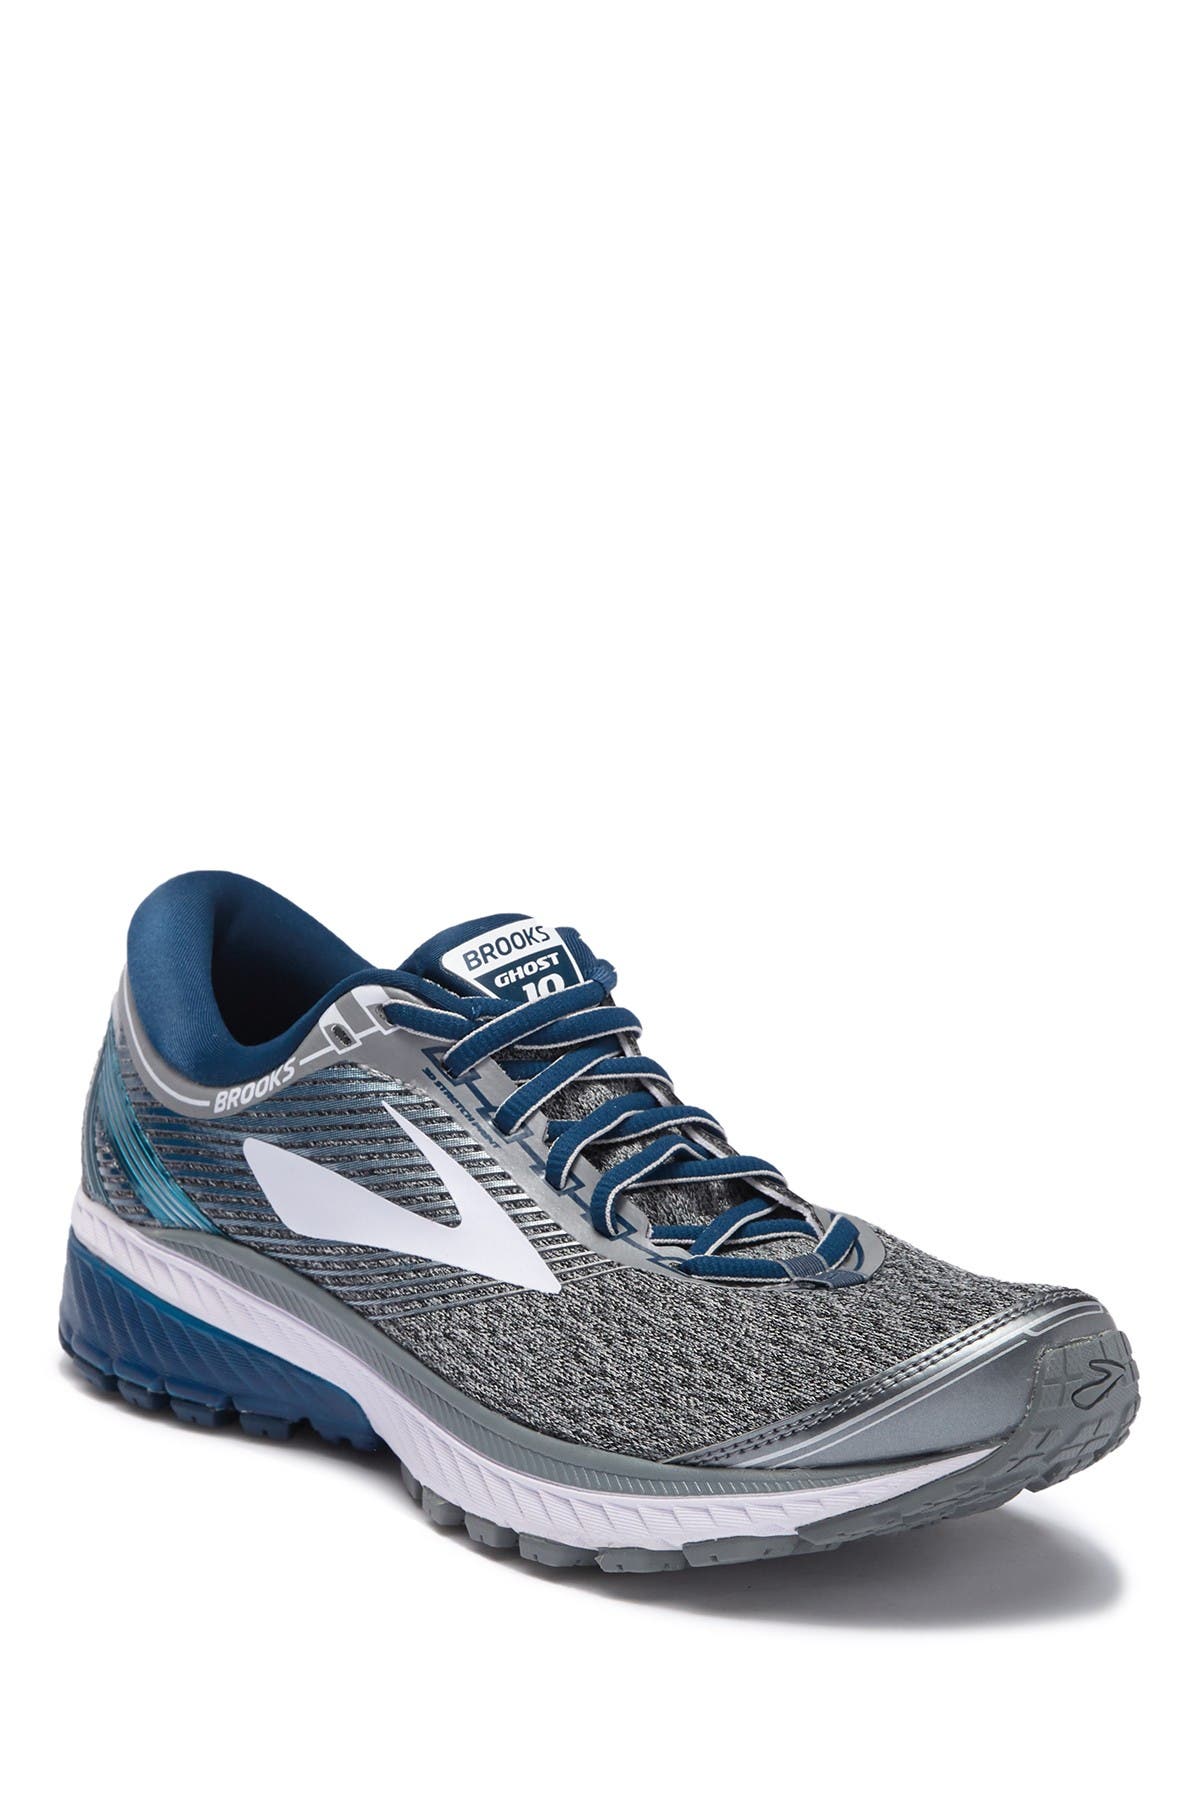 brooks ghost 10 womens wide fit